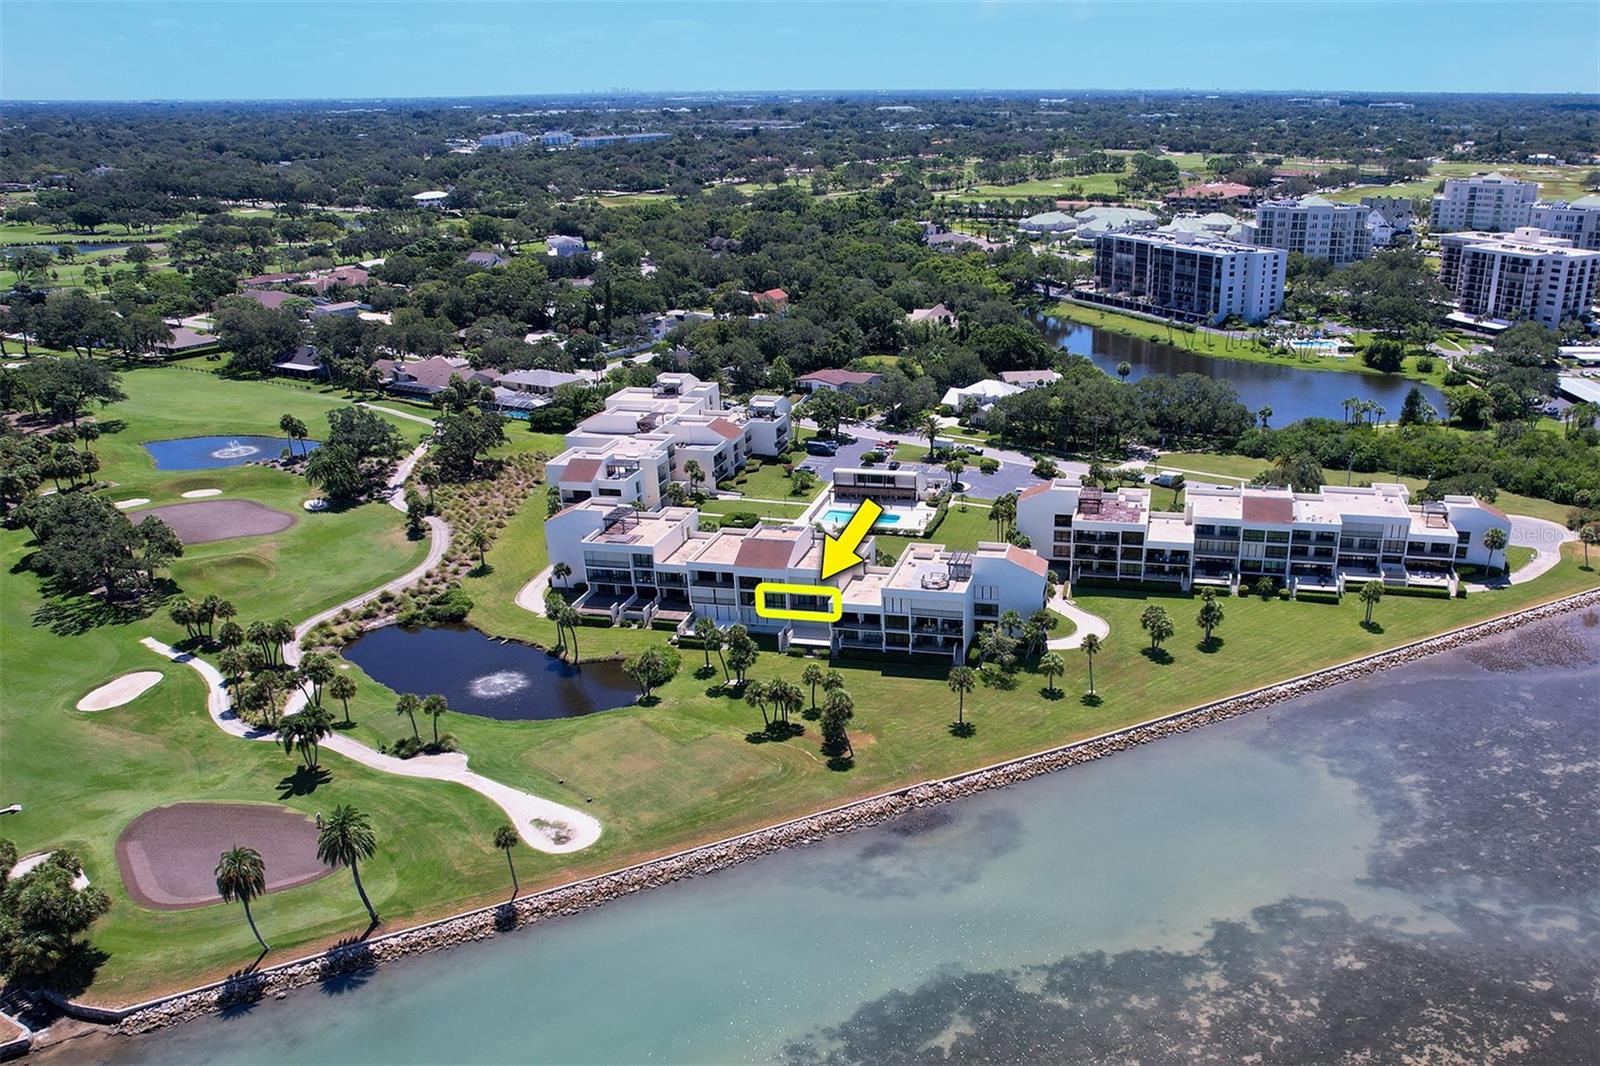 Yellow box shows location of the condo on the golf course and waterfront